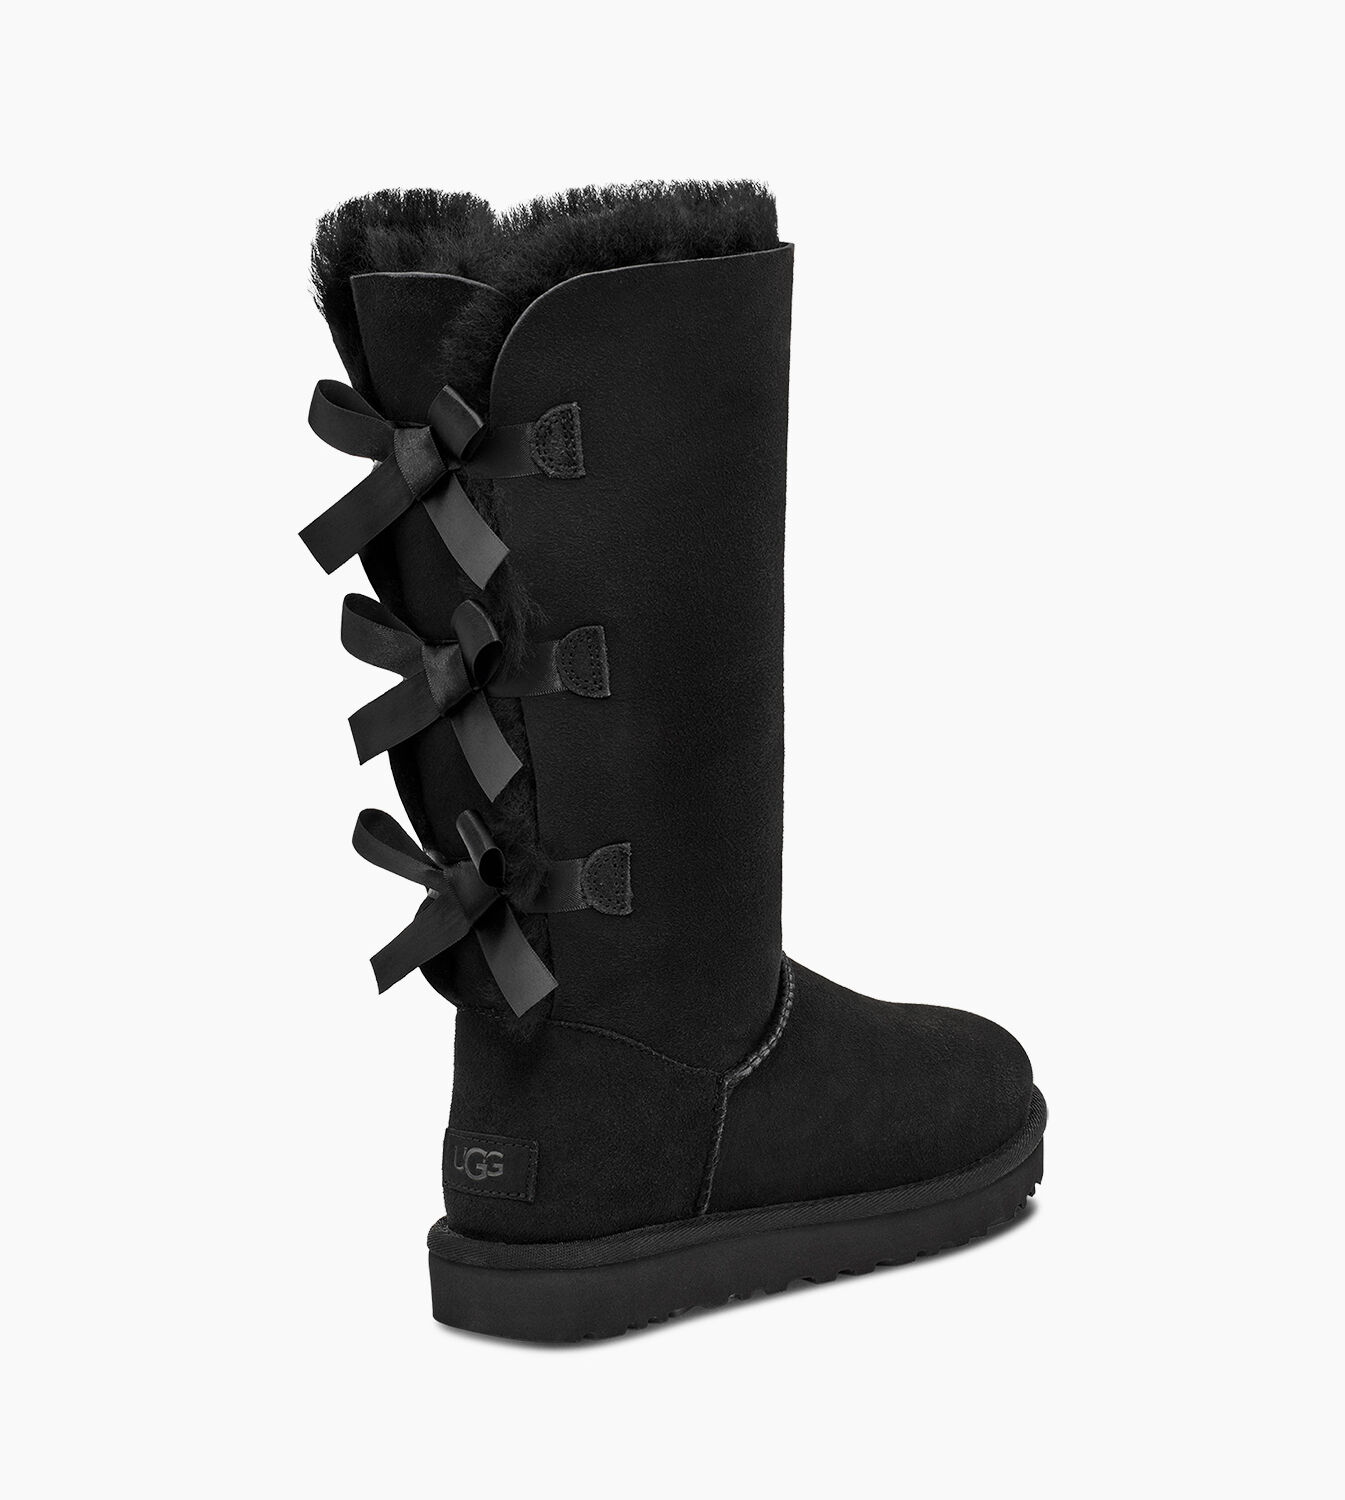 ugg boots sale bailey button